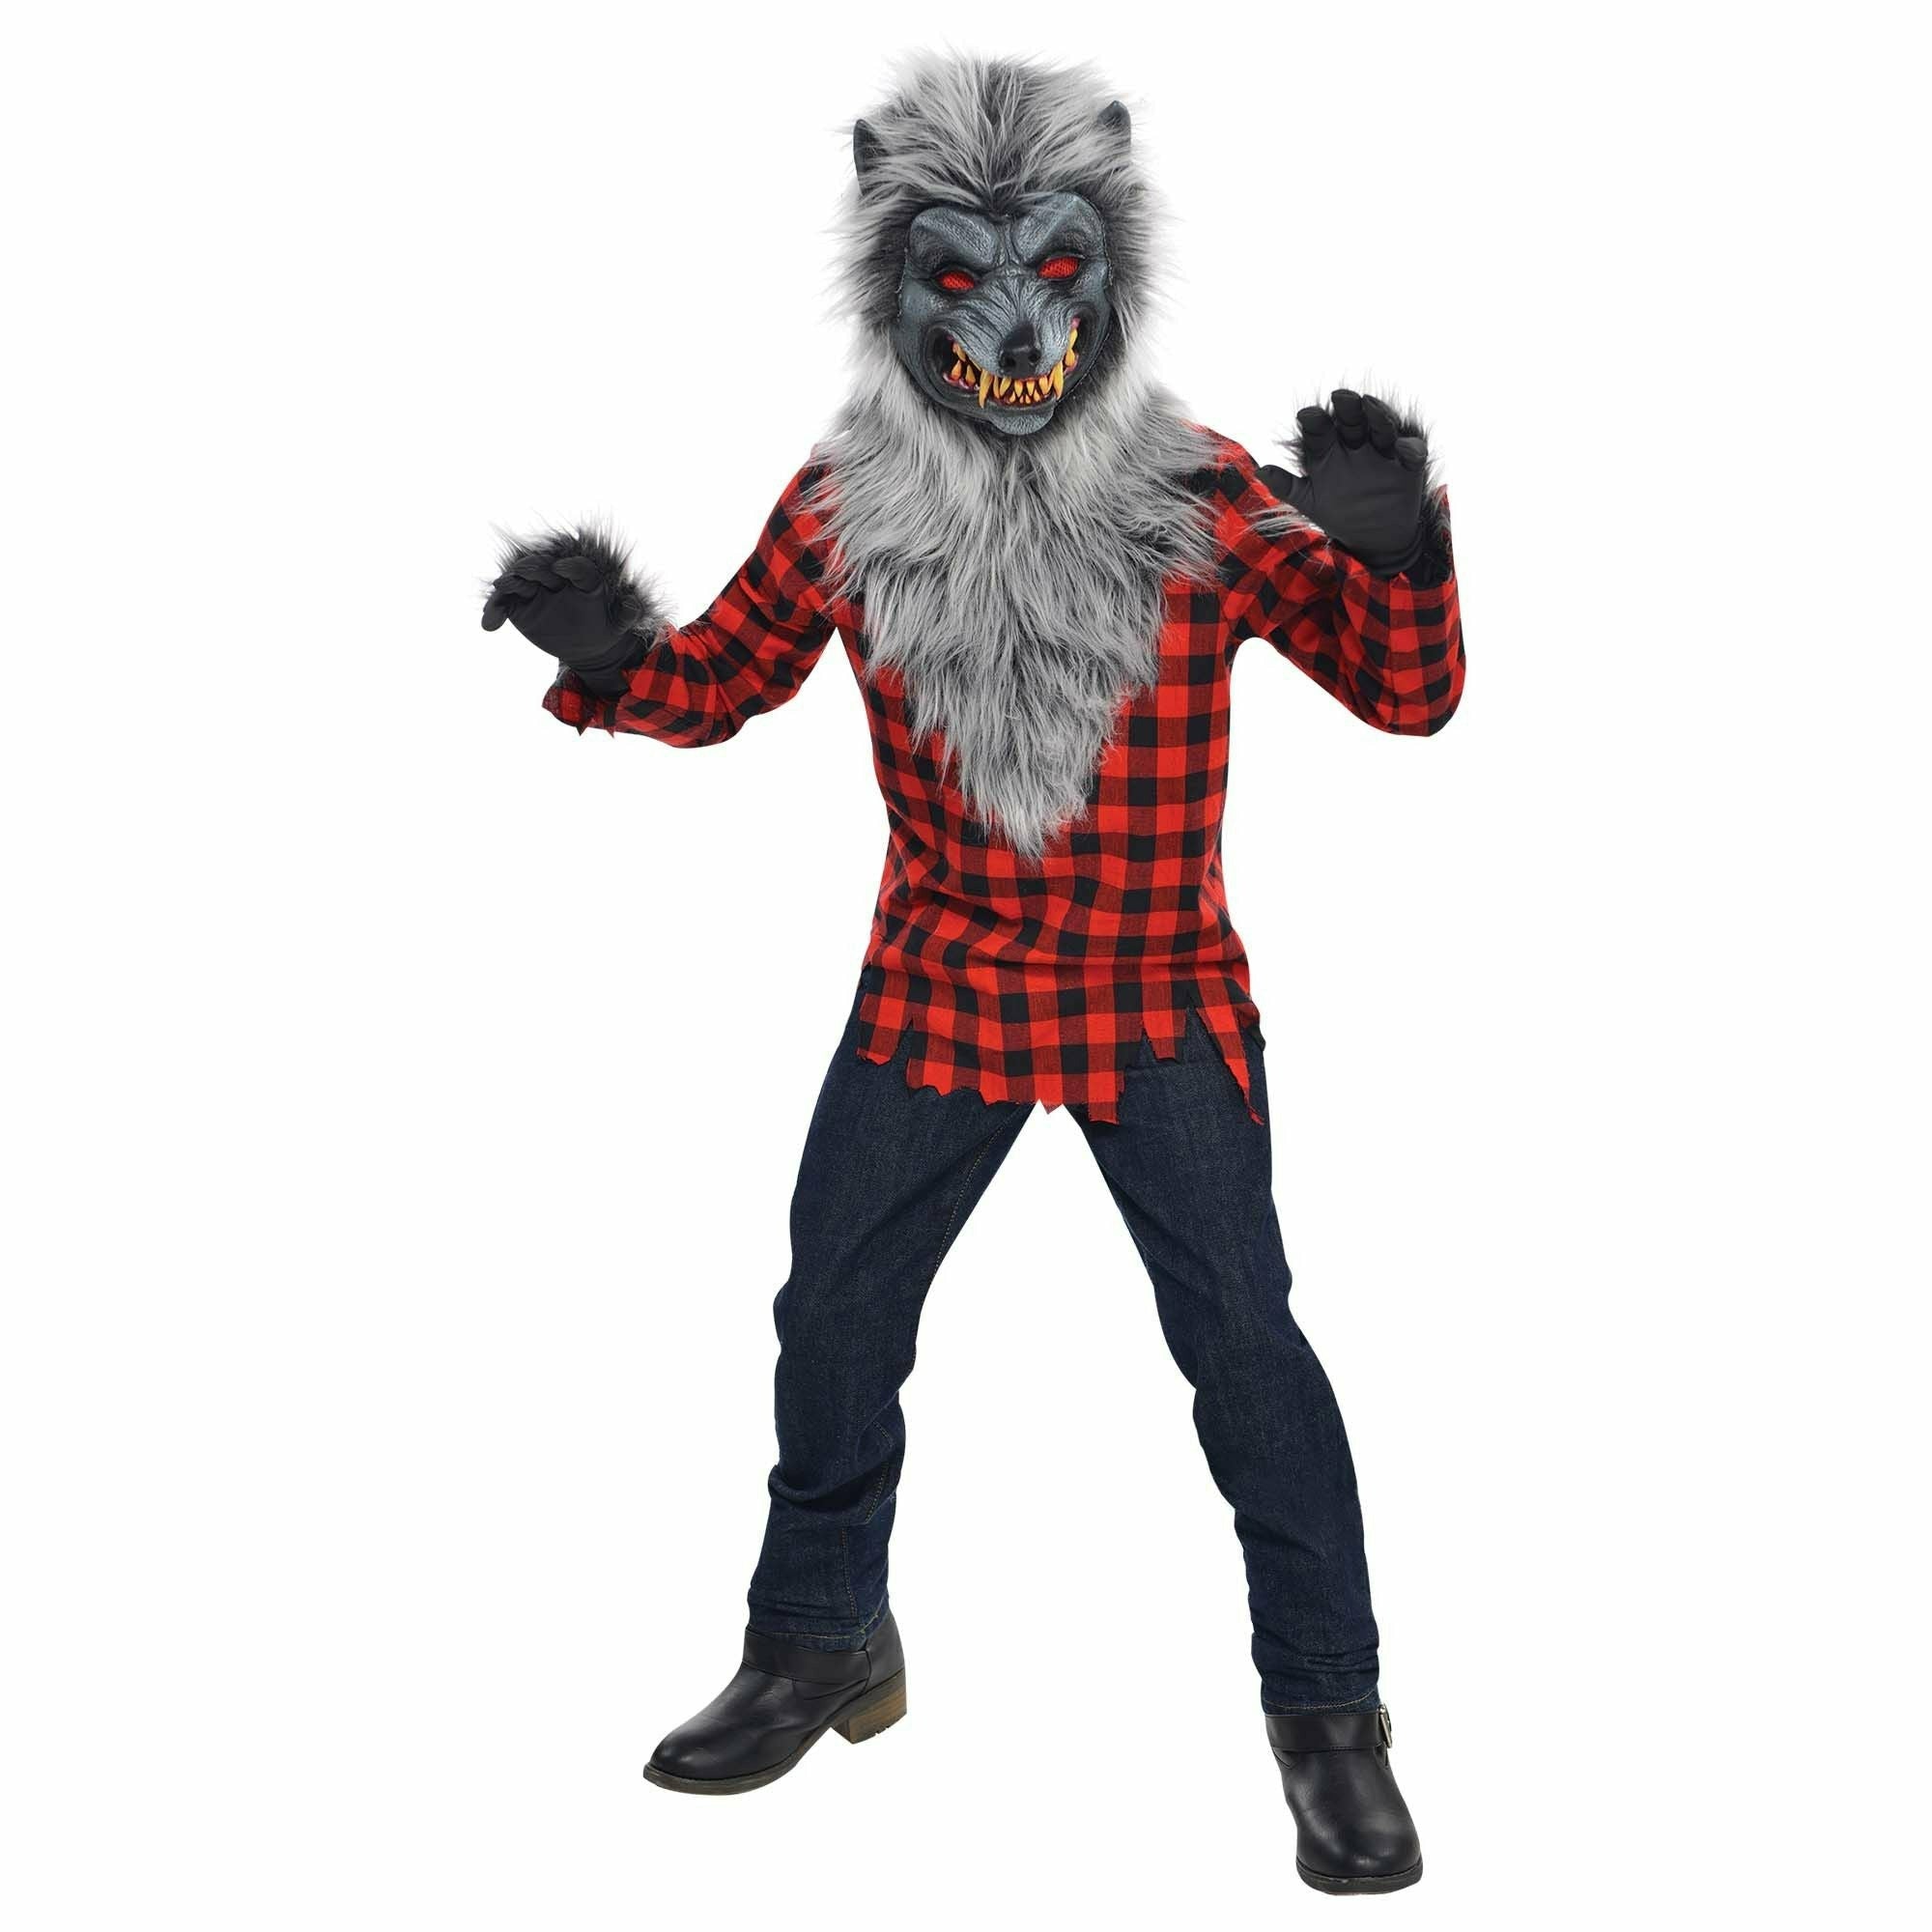 Amscan COSTUMES Large (12-14) Hungry Howler - Large (12-14)